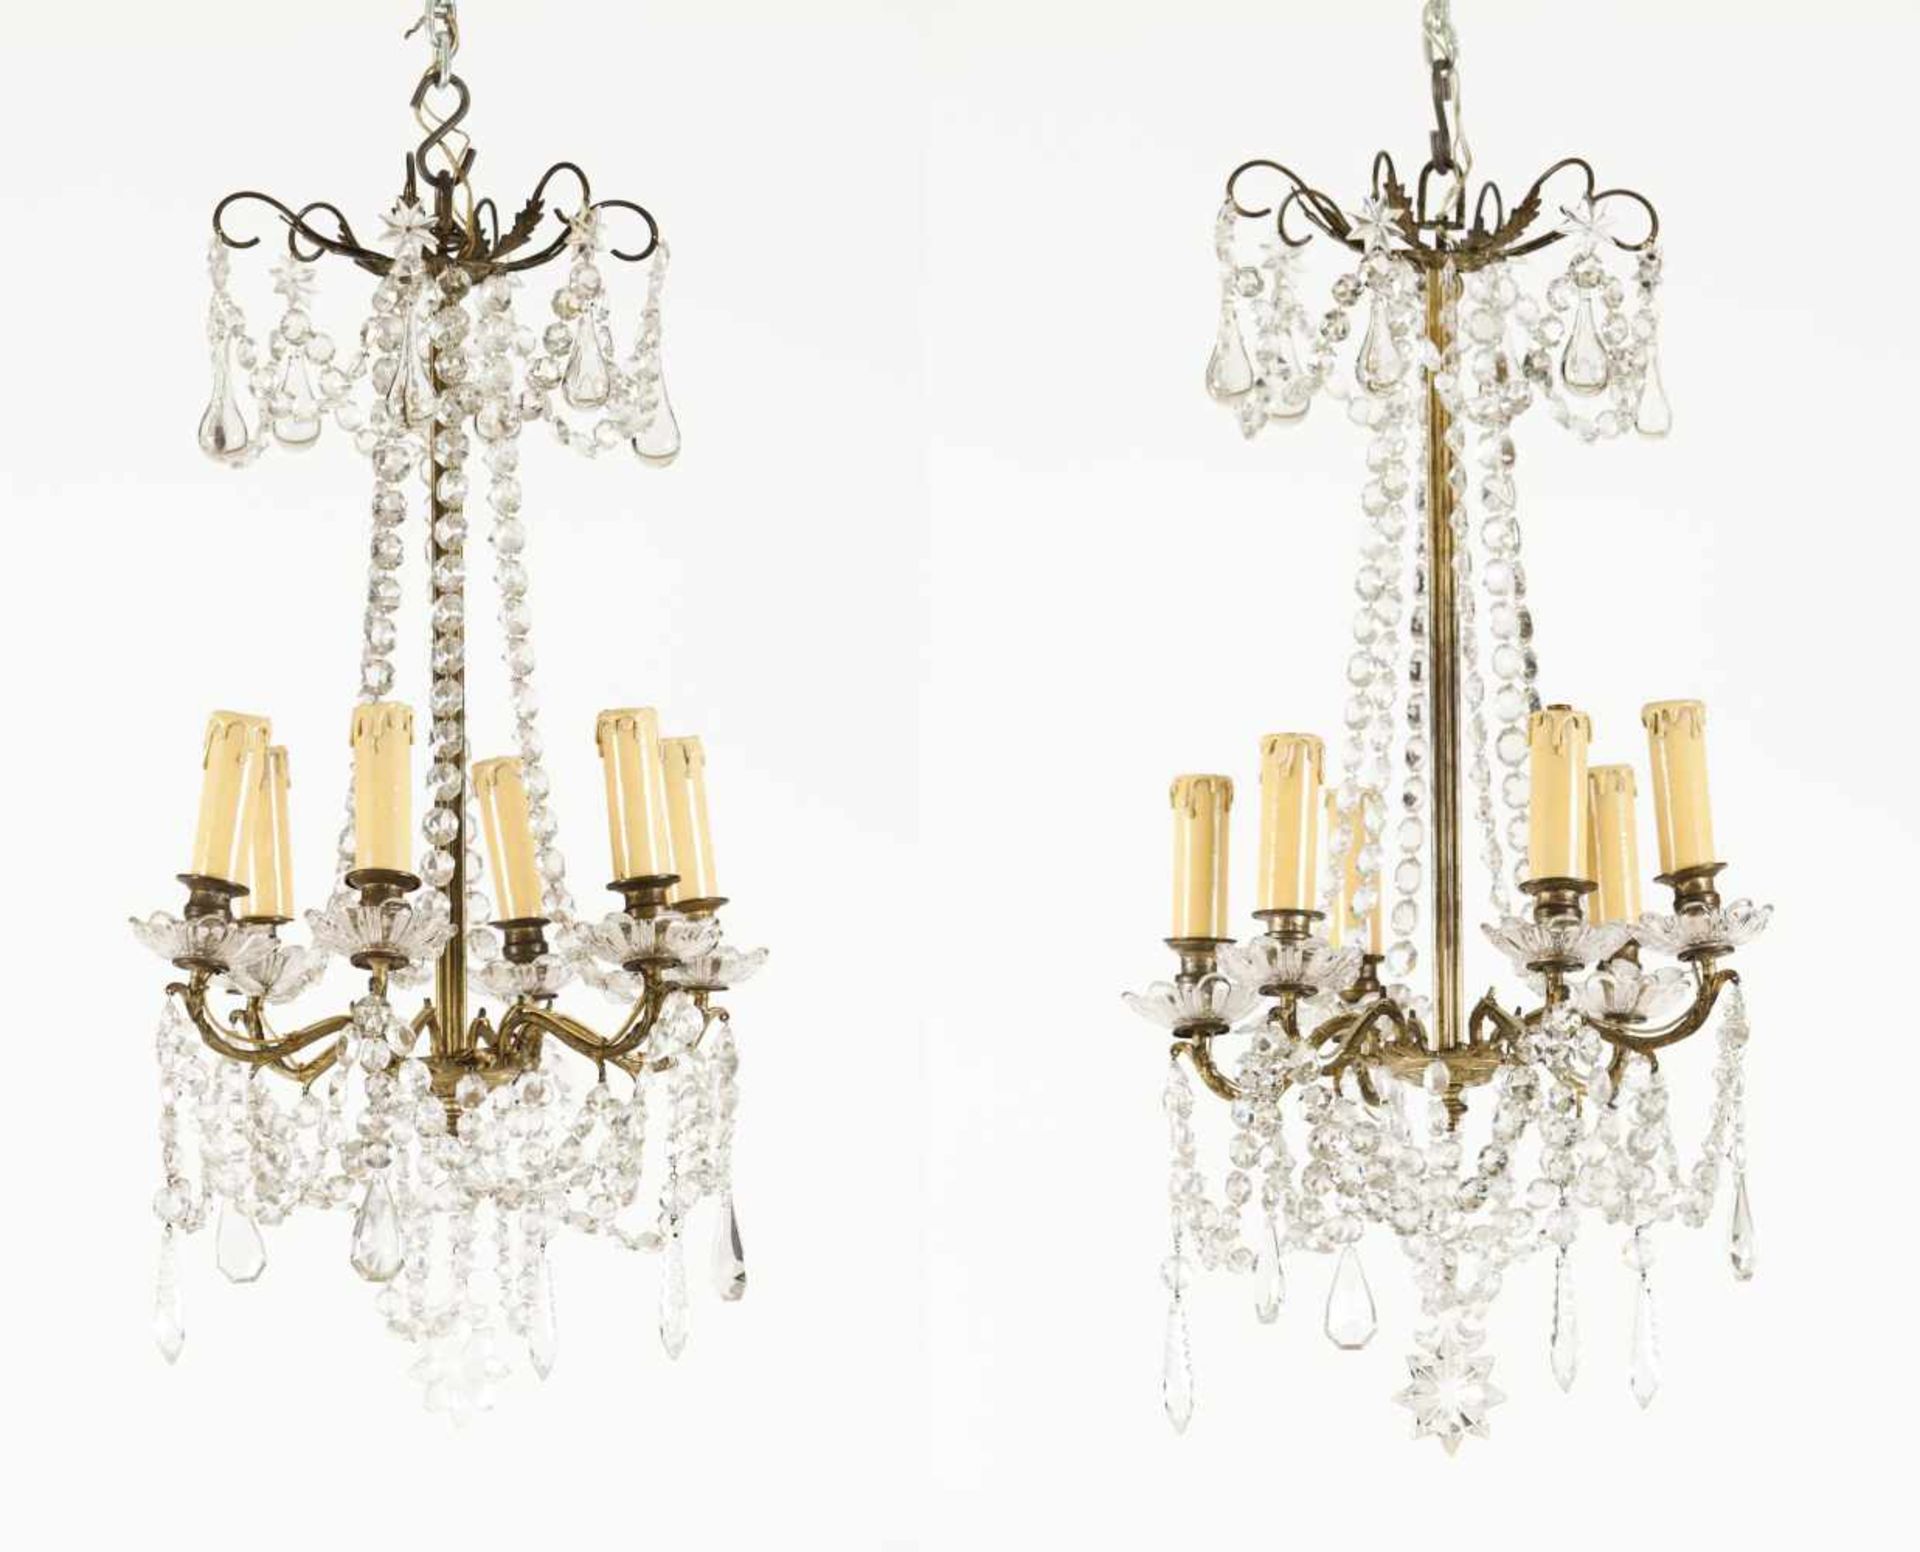 A pair of small Napoleon III chandeliers